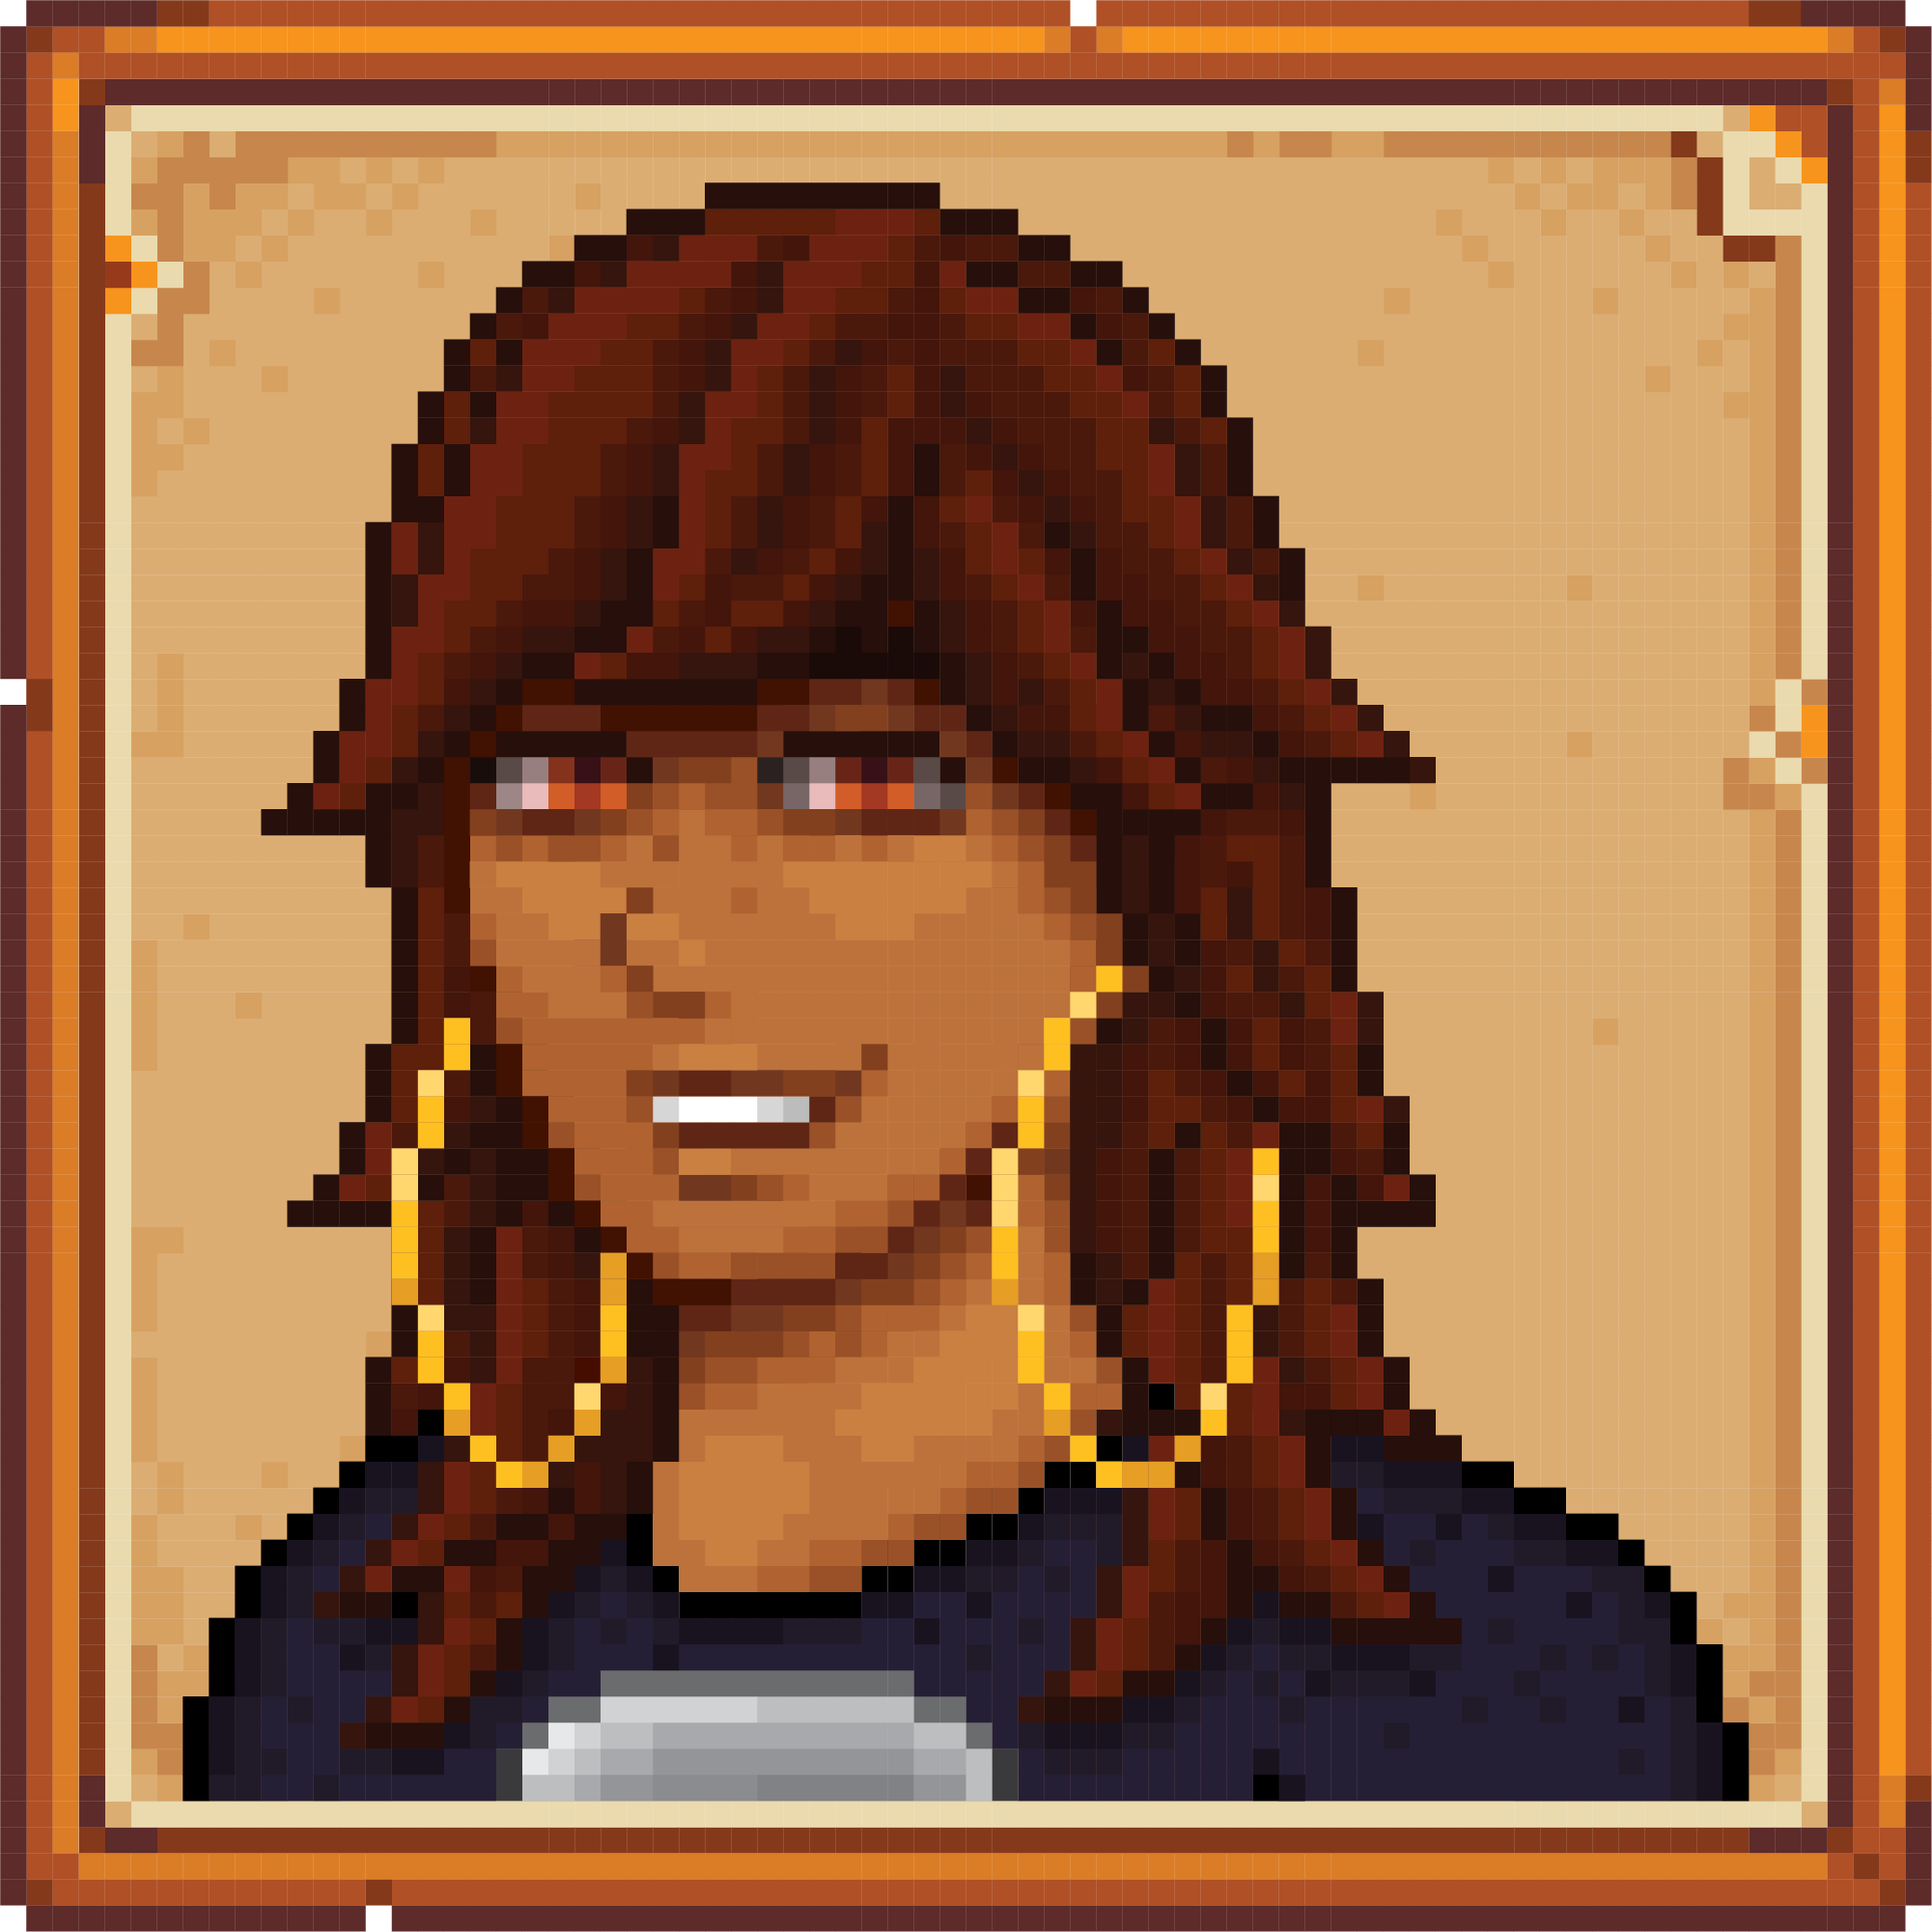 Custom portrait of my friend's Stardew Valley Character! Style follows that of Concerned Ape who created the game. Style is pixelated, he has brown hair, orange eyes, a gray shirt and giant hoop earrings.